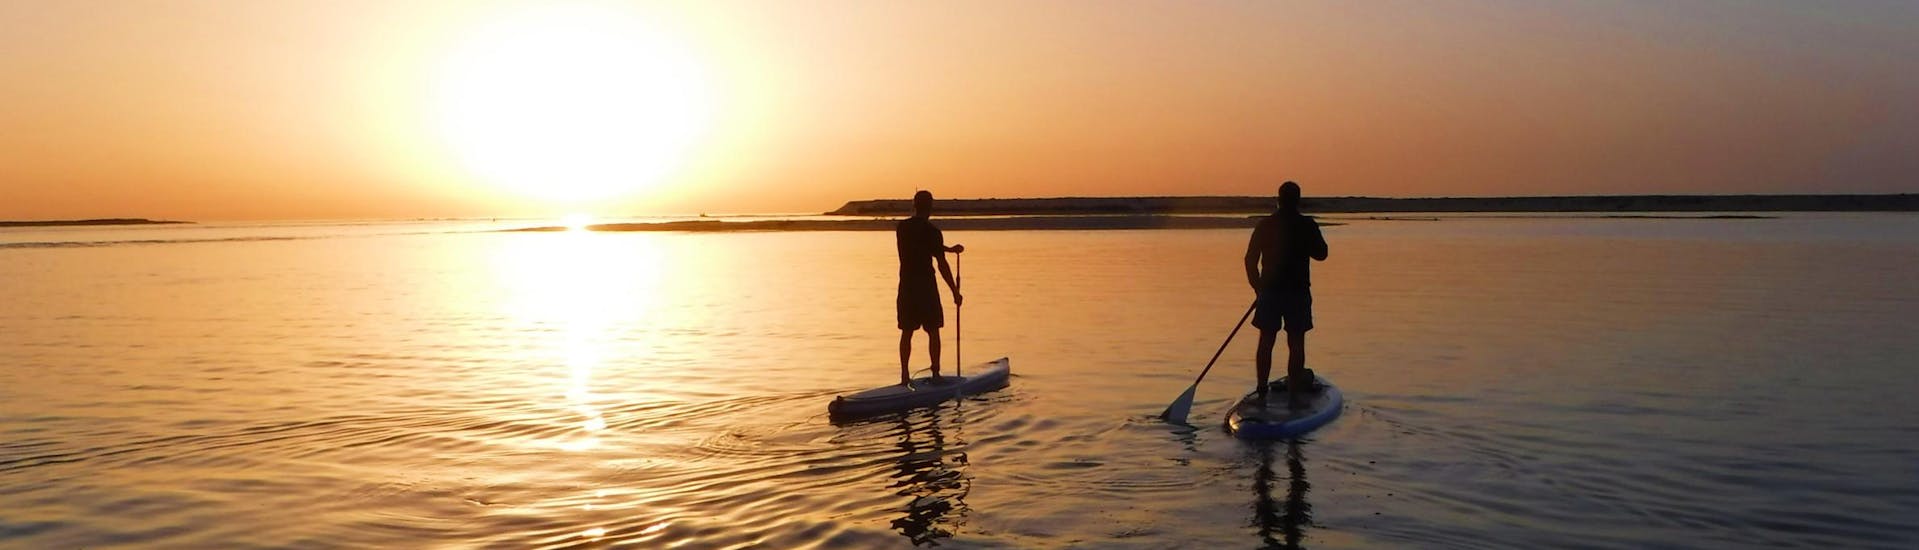 During the Sunset SUP Yoga at Praia da Fuseta with Kite Culture Algarve, two friends are paddling into the beautiful sunset over the lagoon.